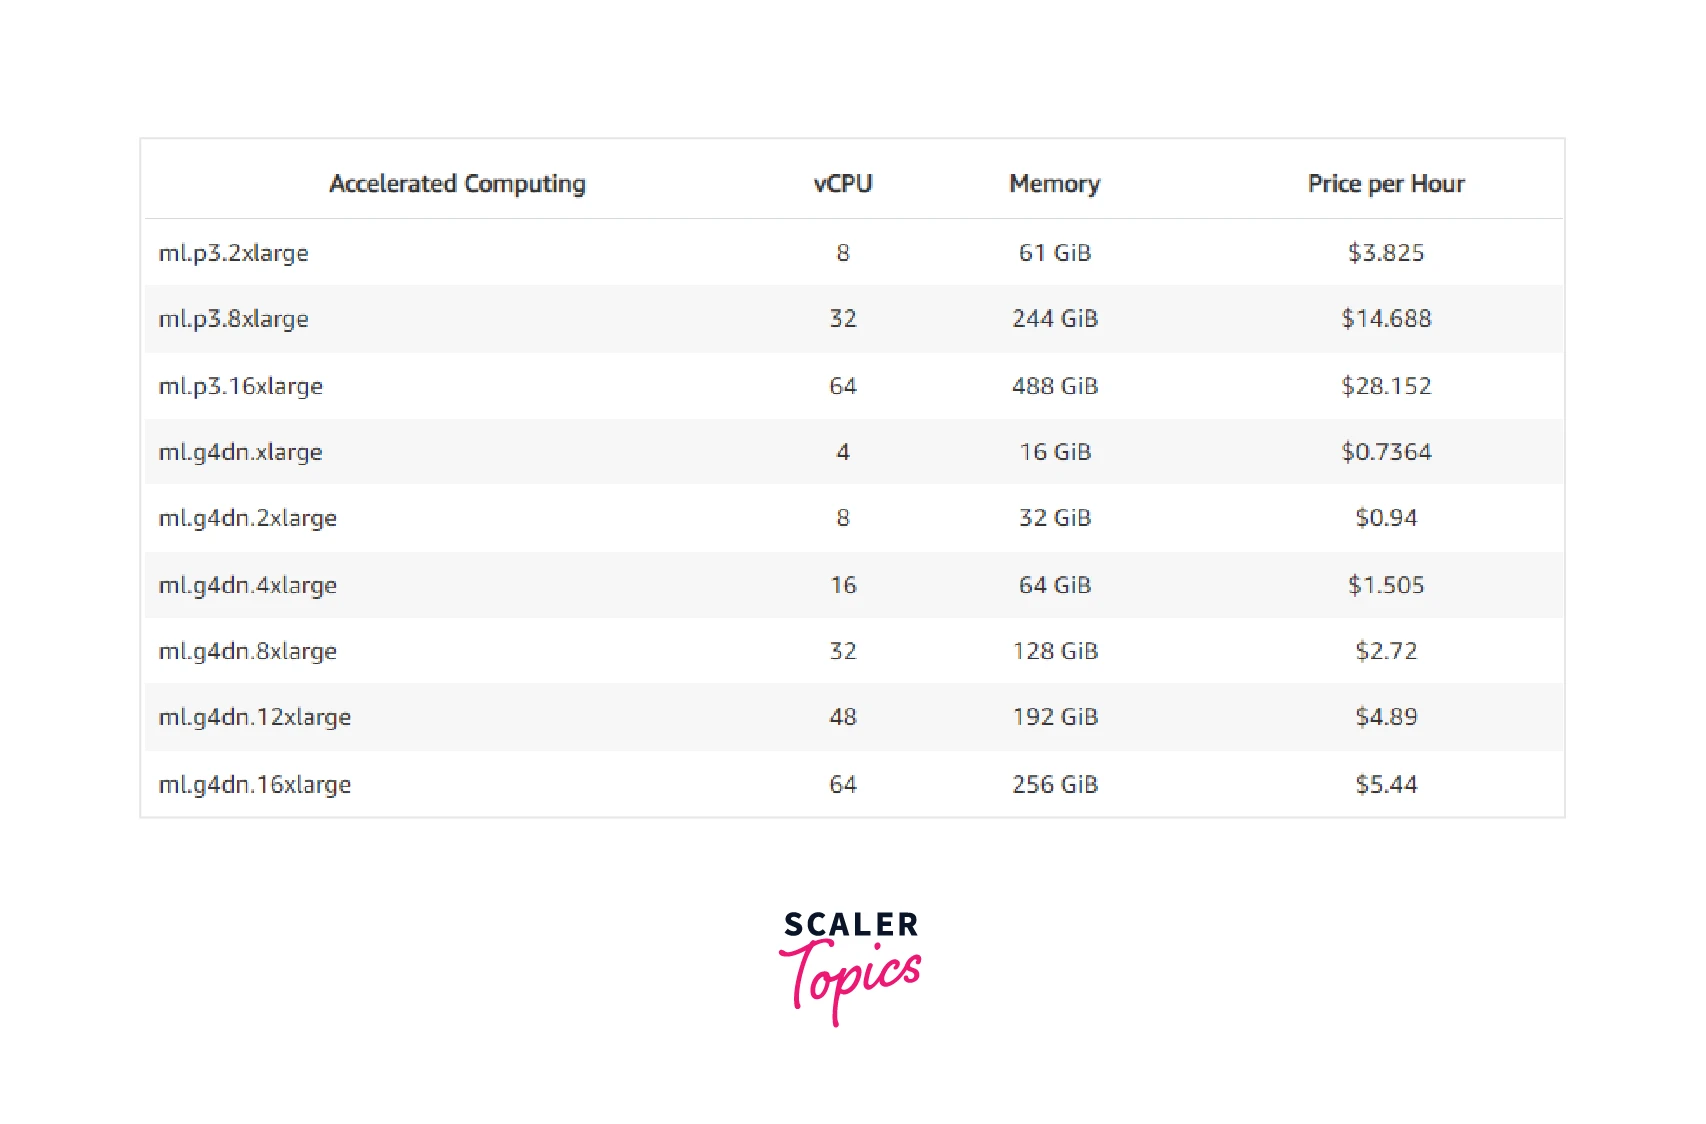 lists of pricing offered for Accelerated Computing